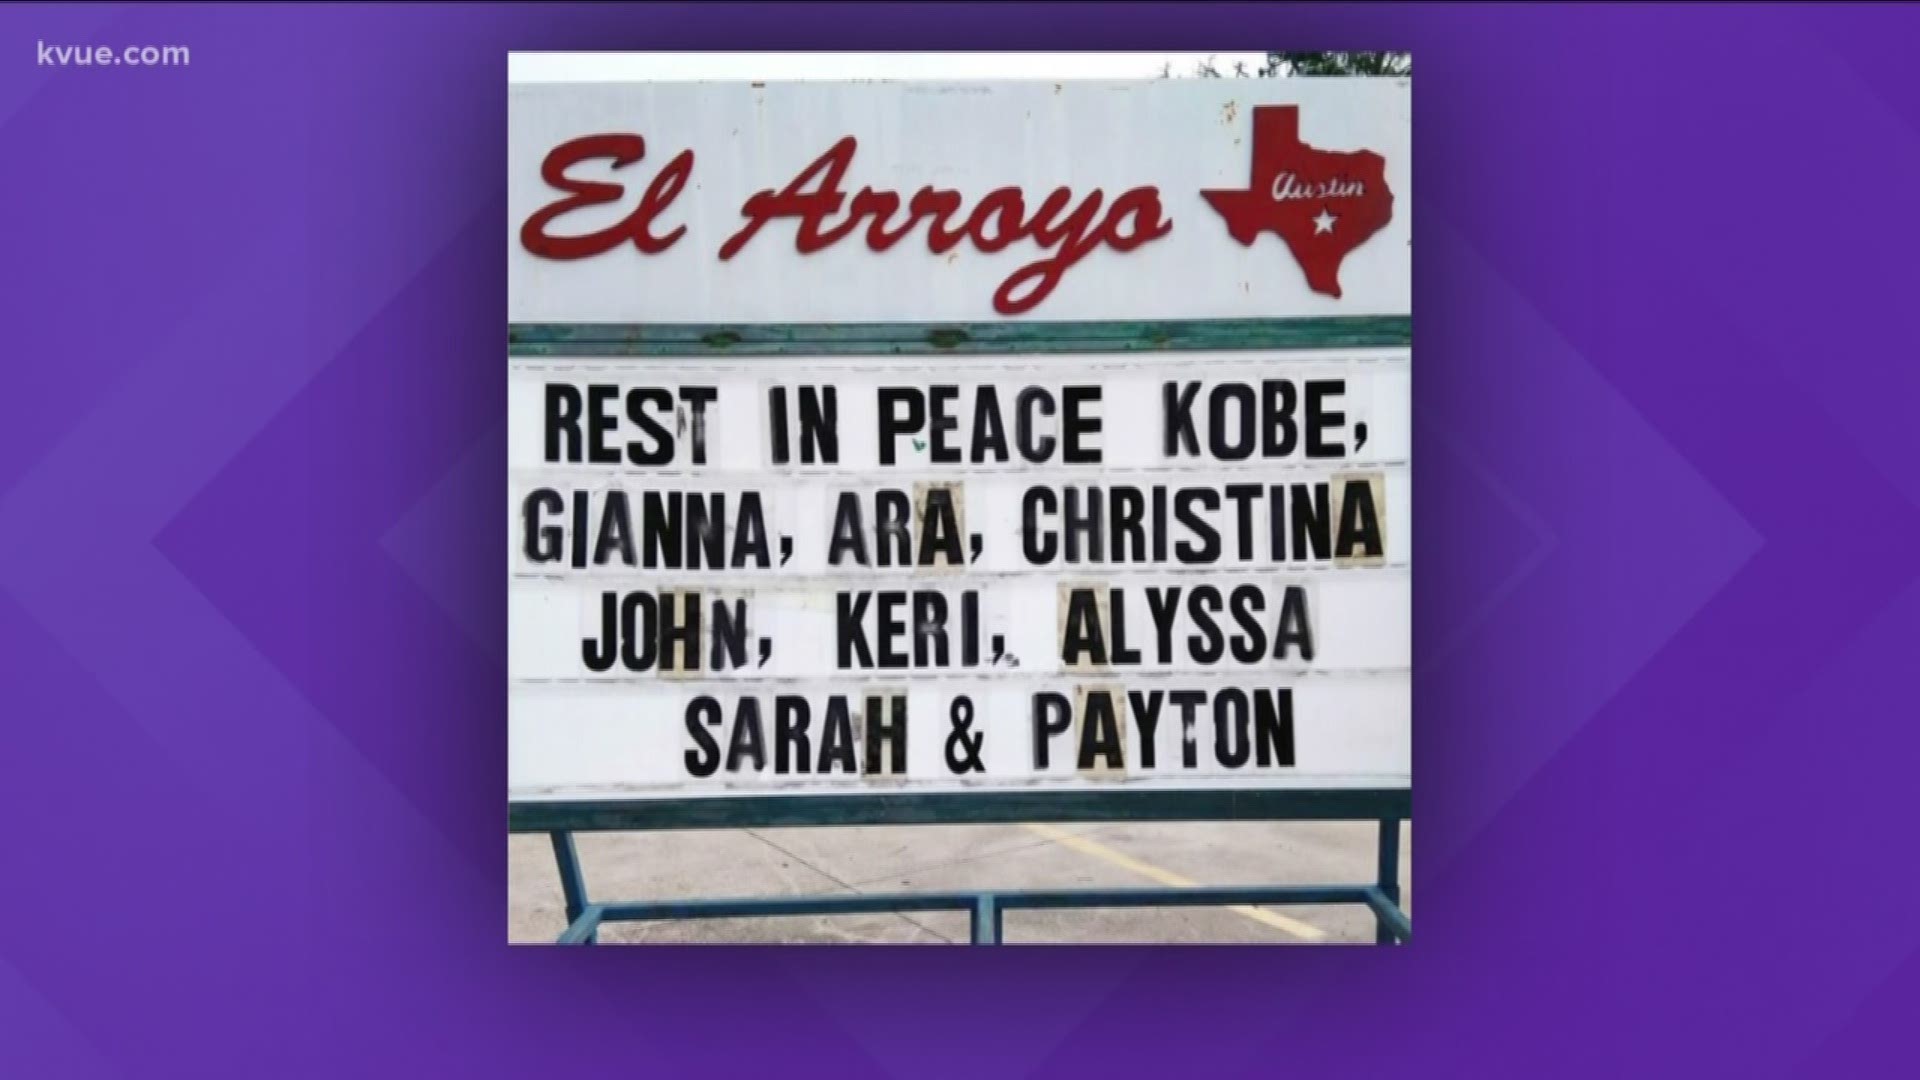 One of Austin's most famous signs paid tribute to the nine people who died in a helicopter crash in California.